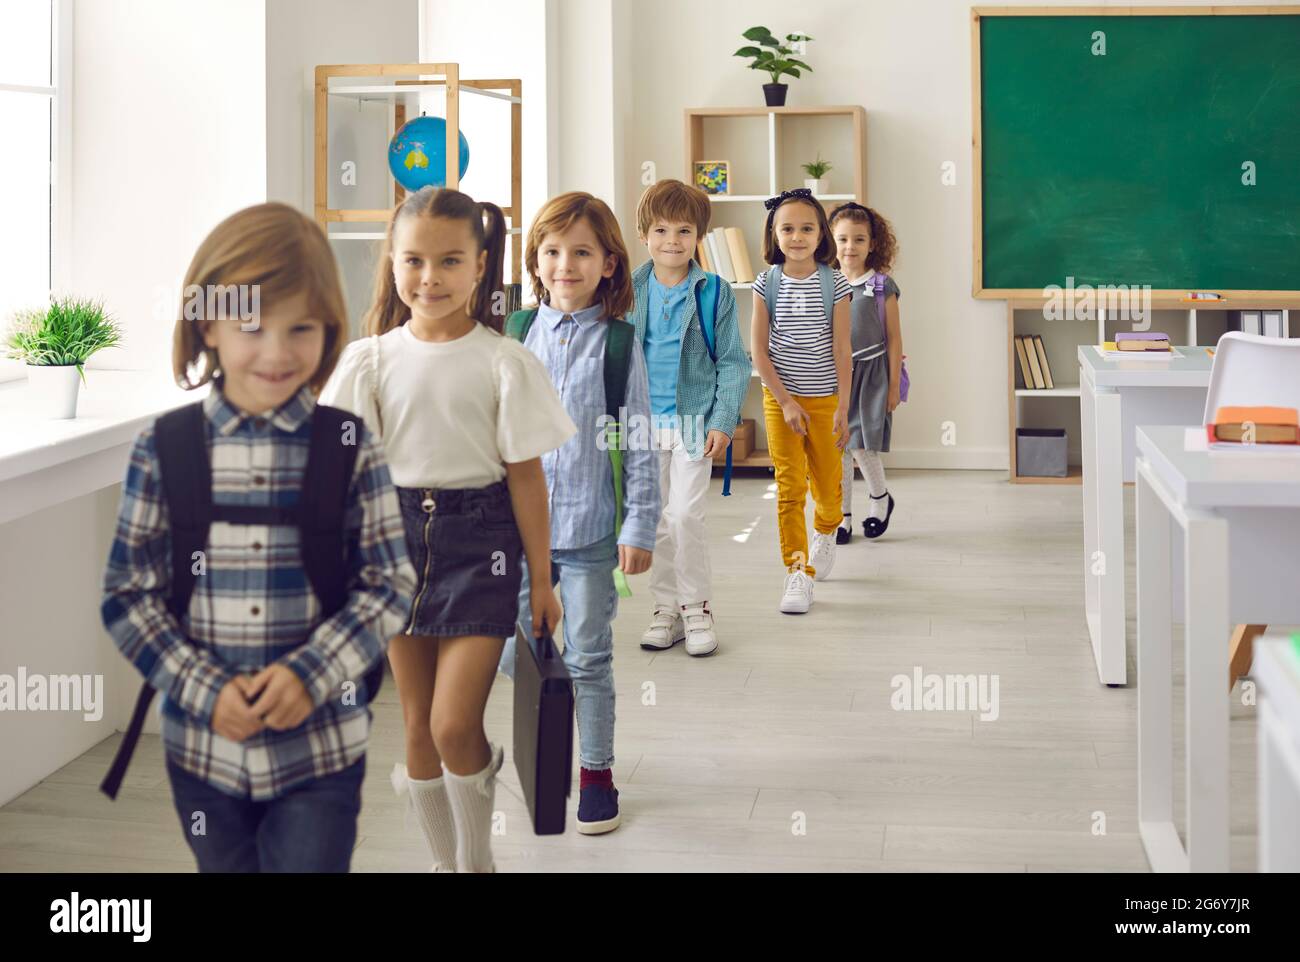 Small group of happy elementary school students leaving their classroom after a lesson Stock Photo